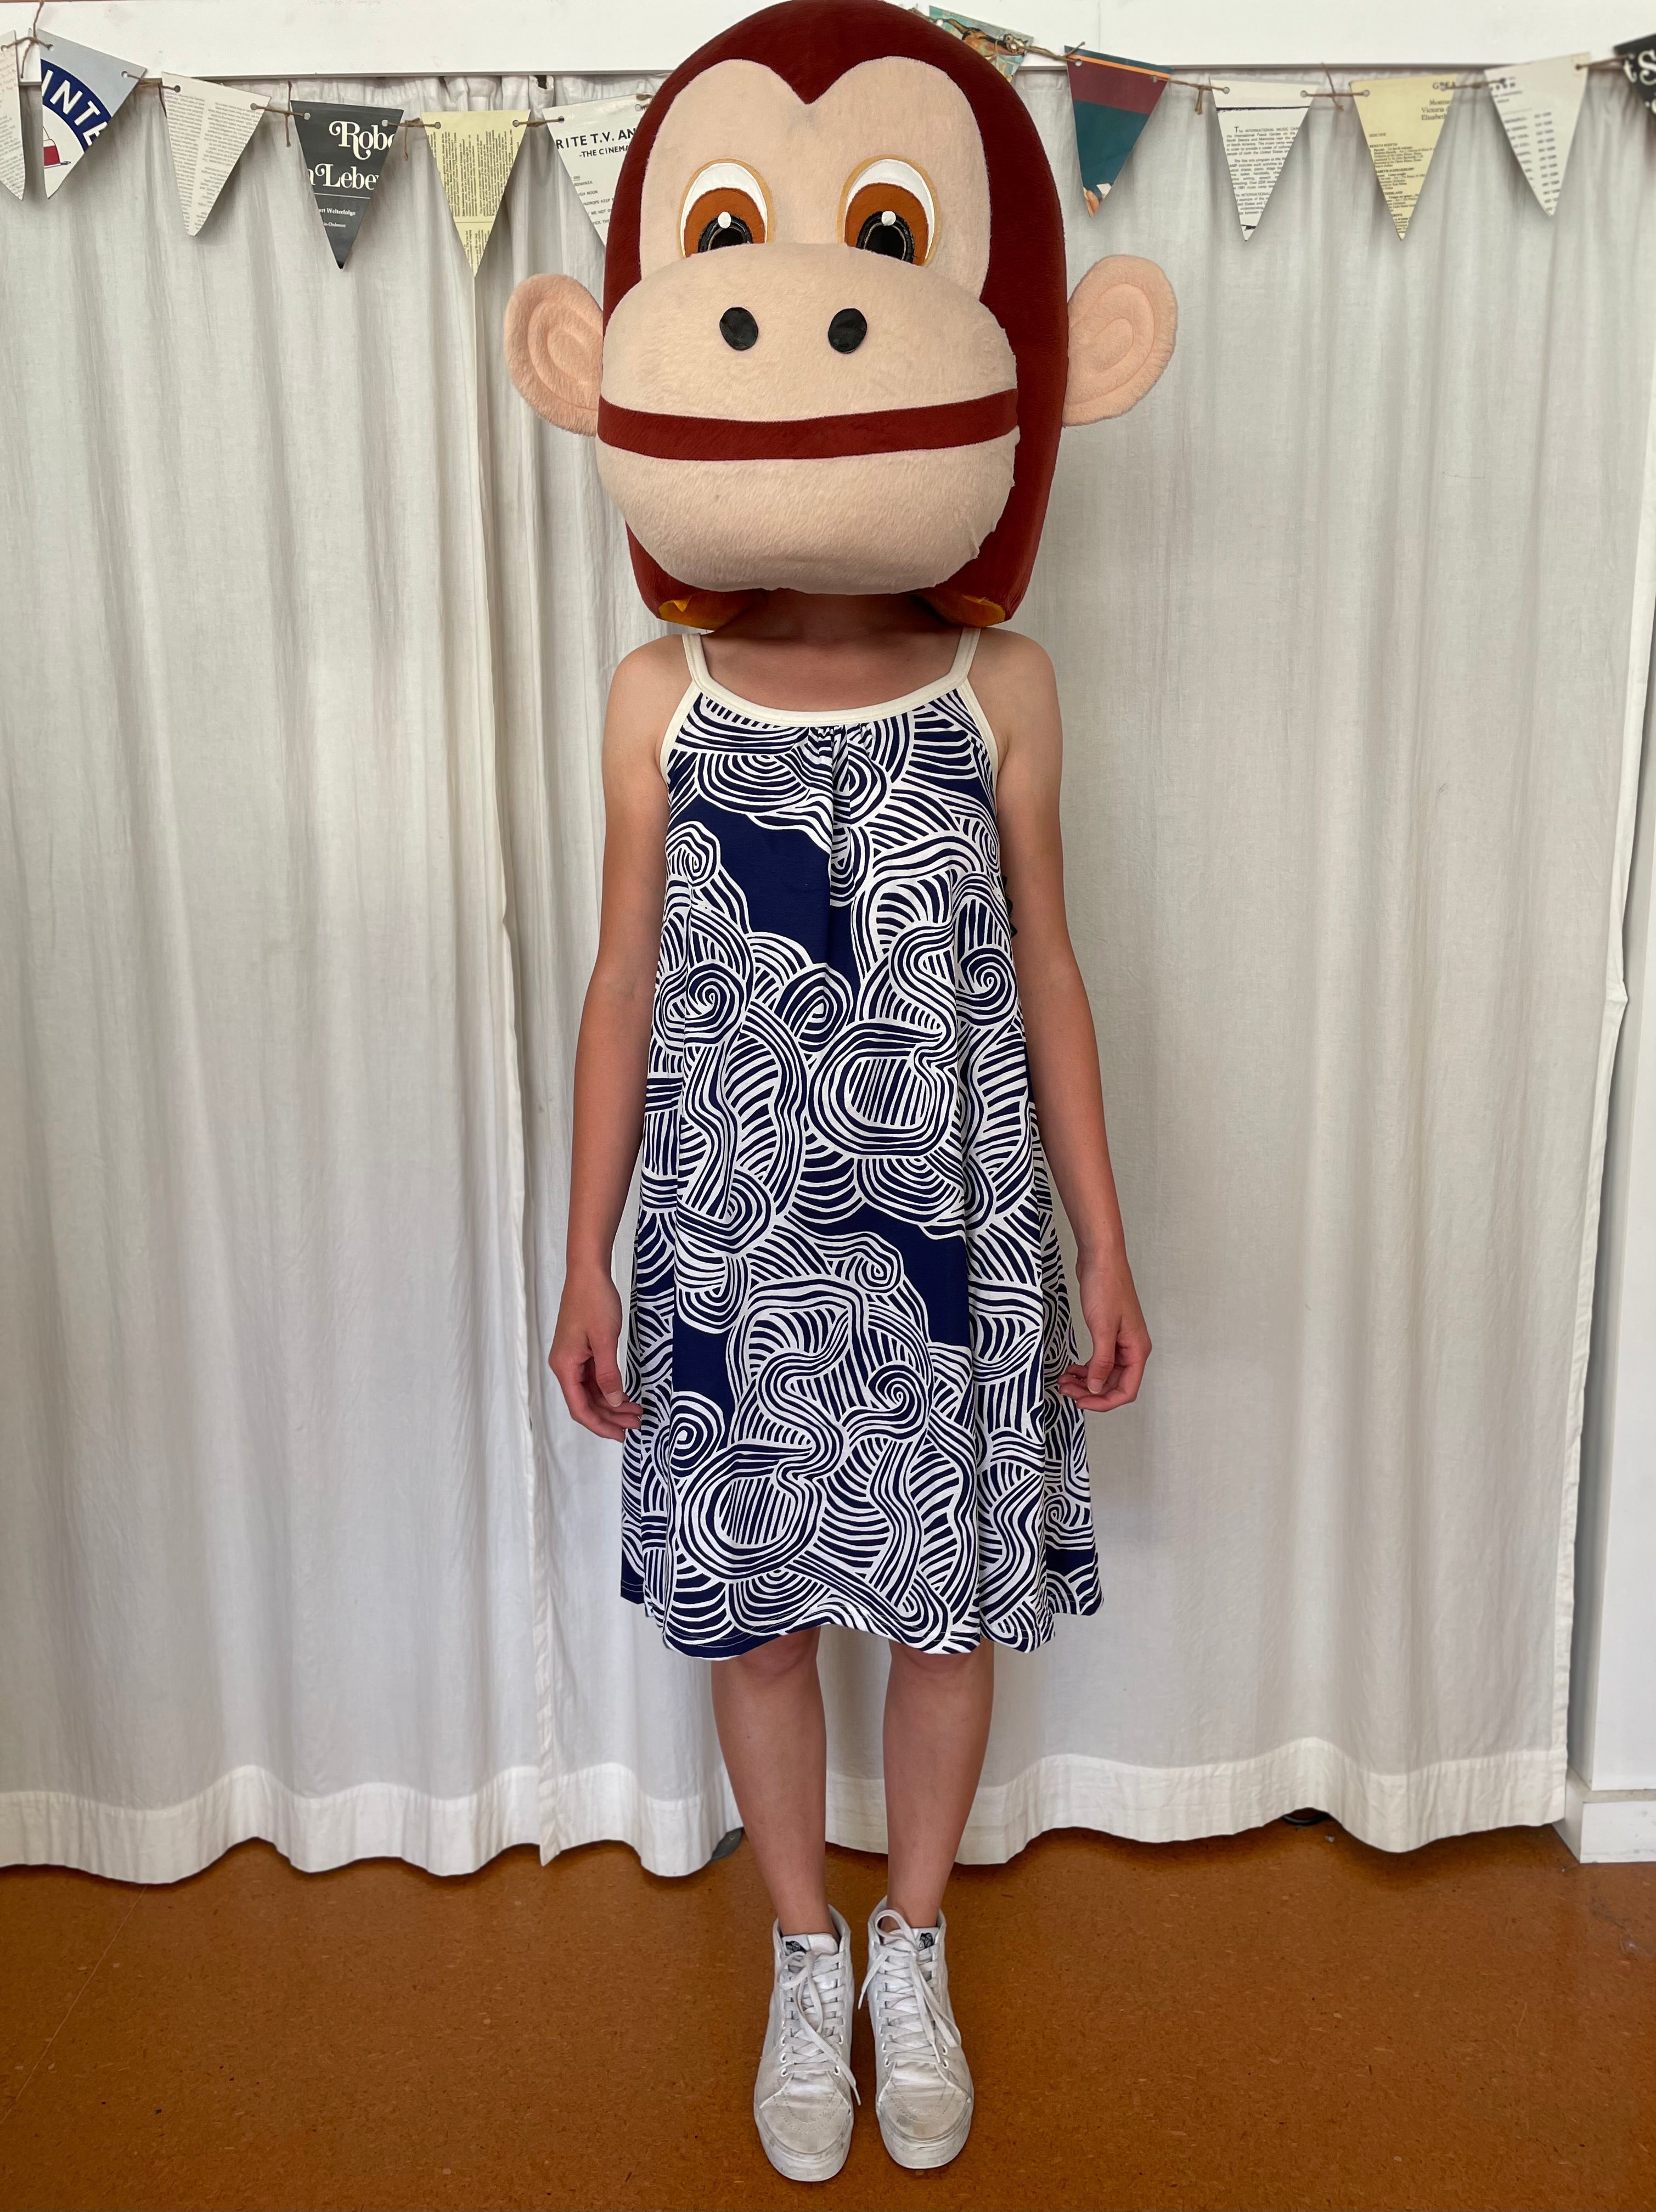 Cotton Cami Dress on person with monkey head